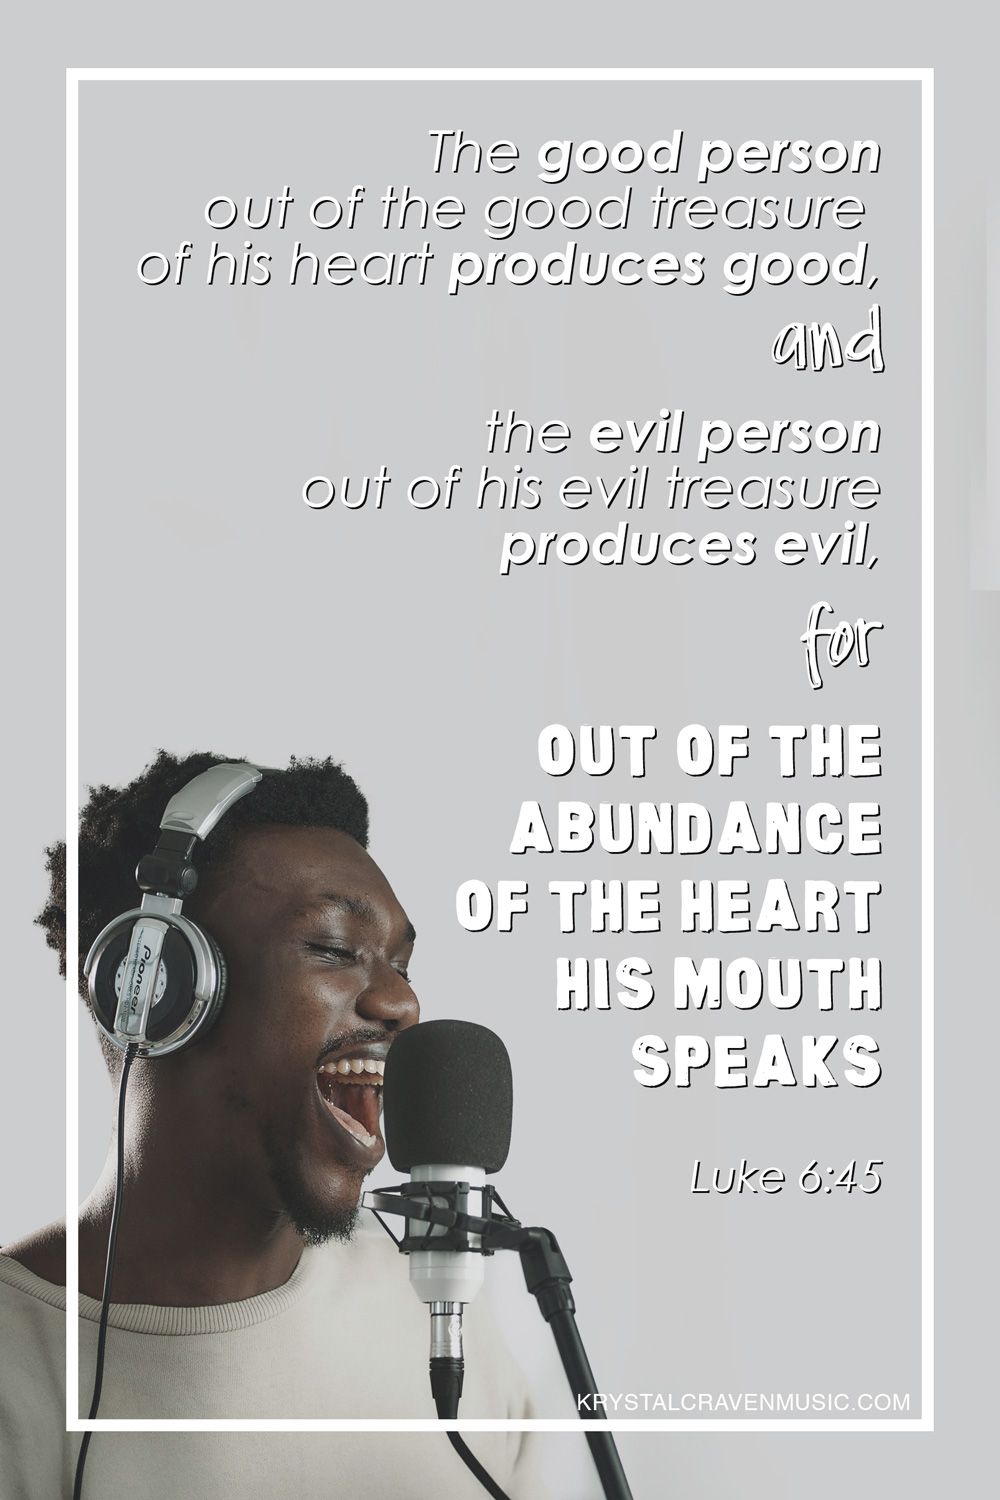 The bible verse text of Luke 6:45, "The good person out of the good treasure of his heart produces good, and the evil person out of his evil treasure produces evil, for out of the abundance of the heart his mouth speaks", overlaying a man with headphones on speaking into a microphone enthusiastically.